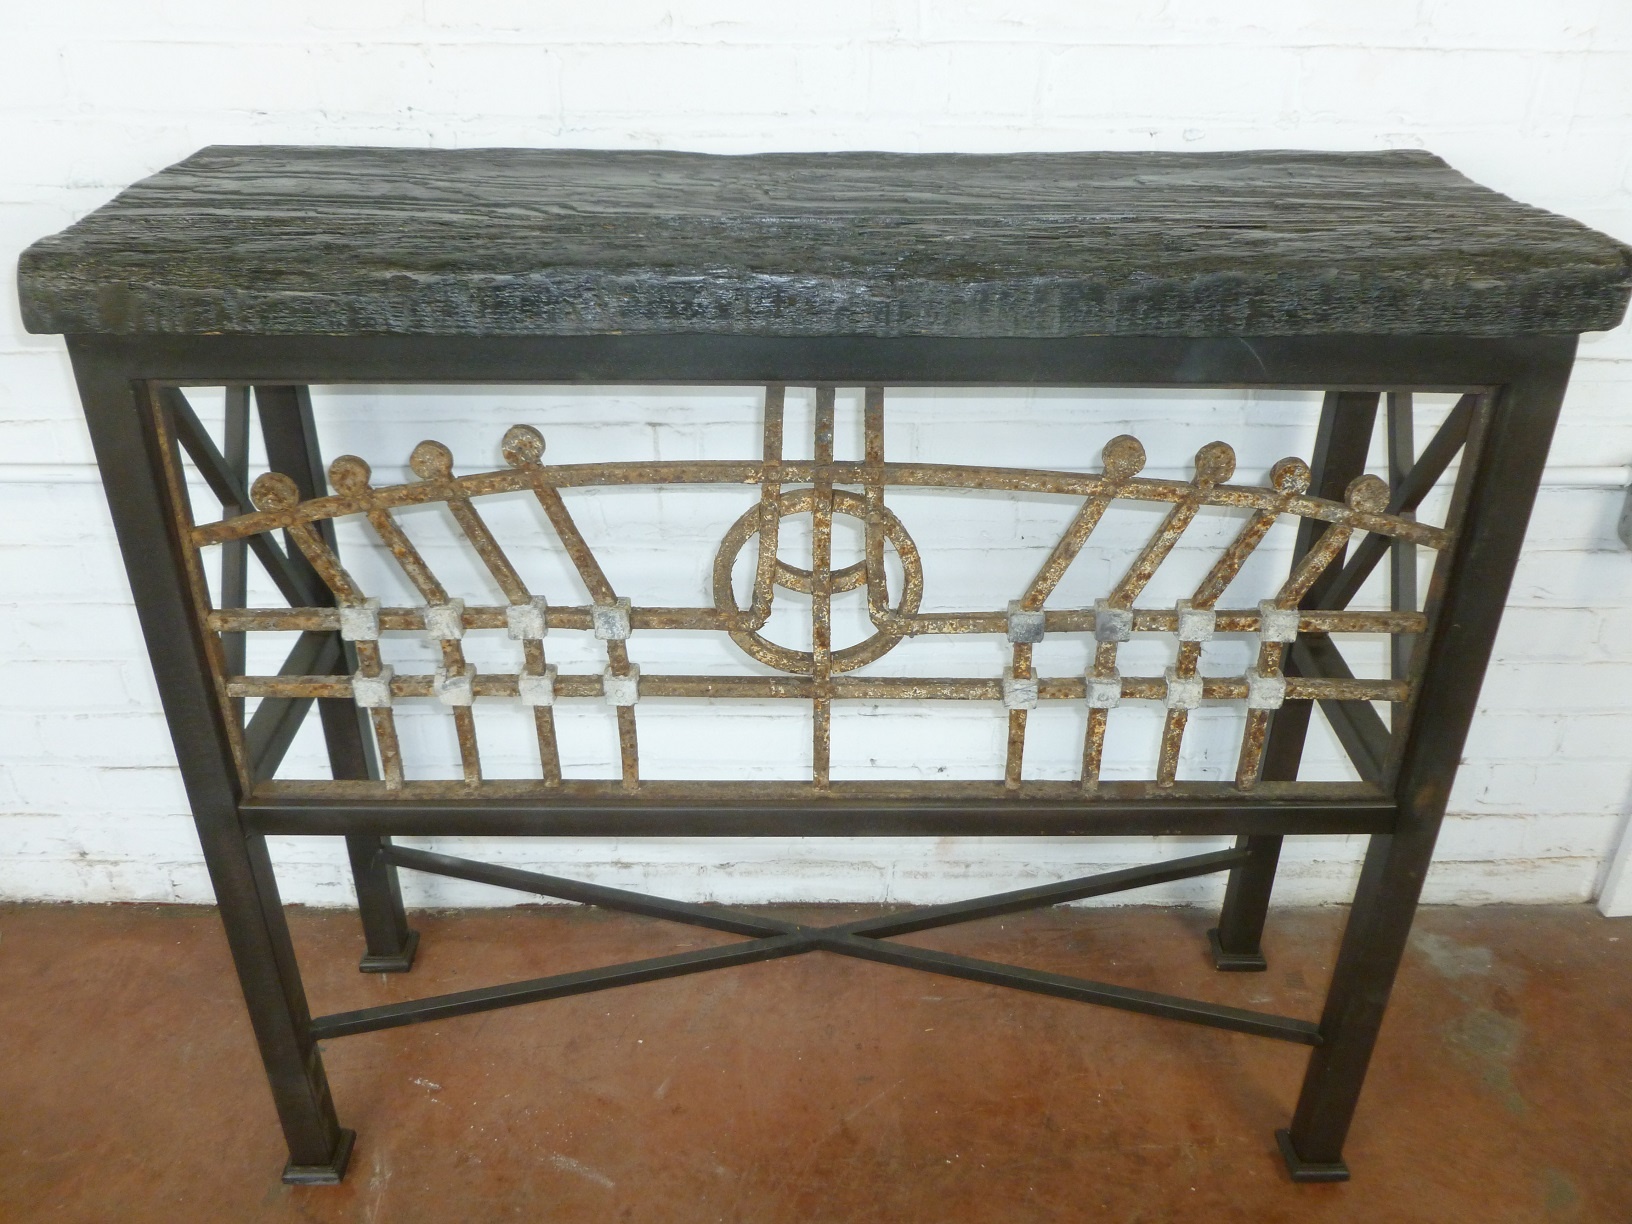 Custom iron console table by Ferro Designs LLC with a dark iron base finish and a barnwood top.